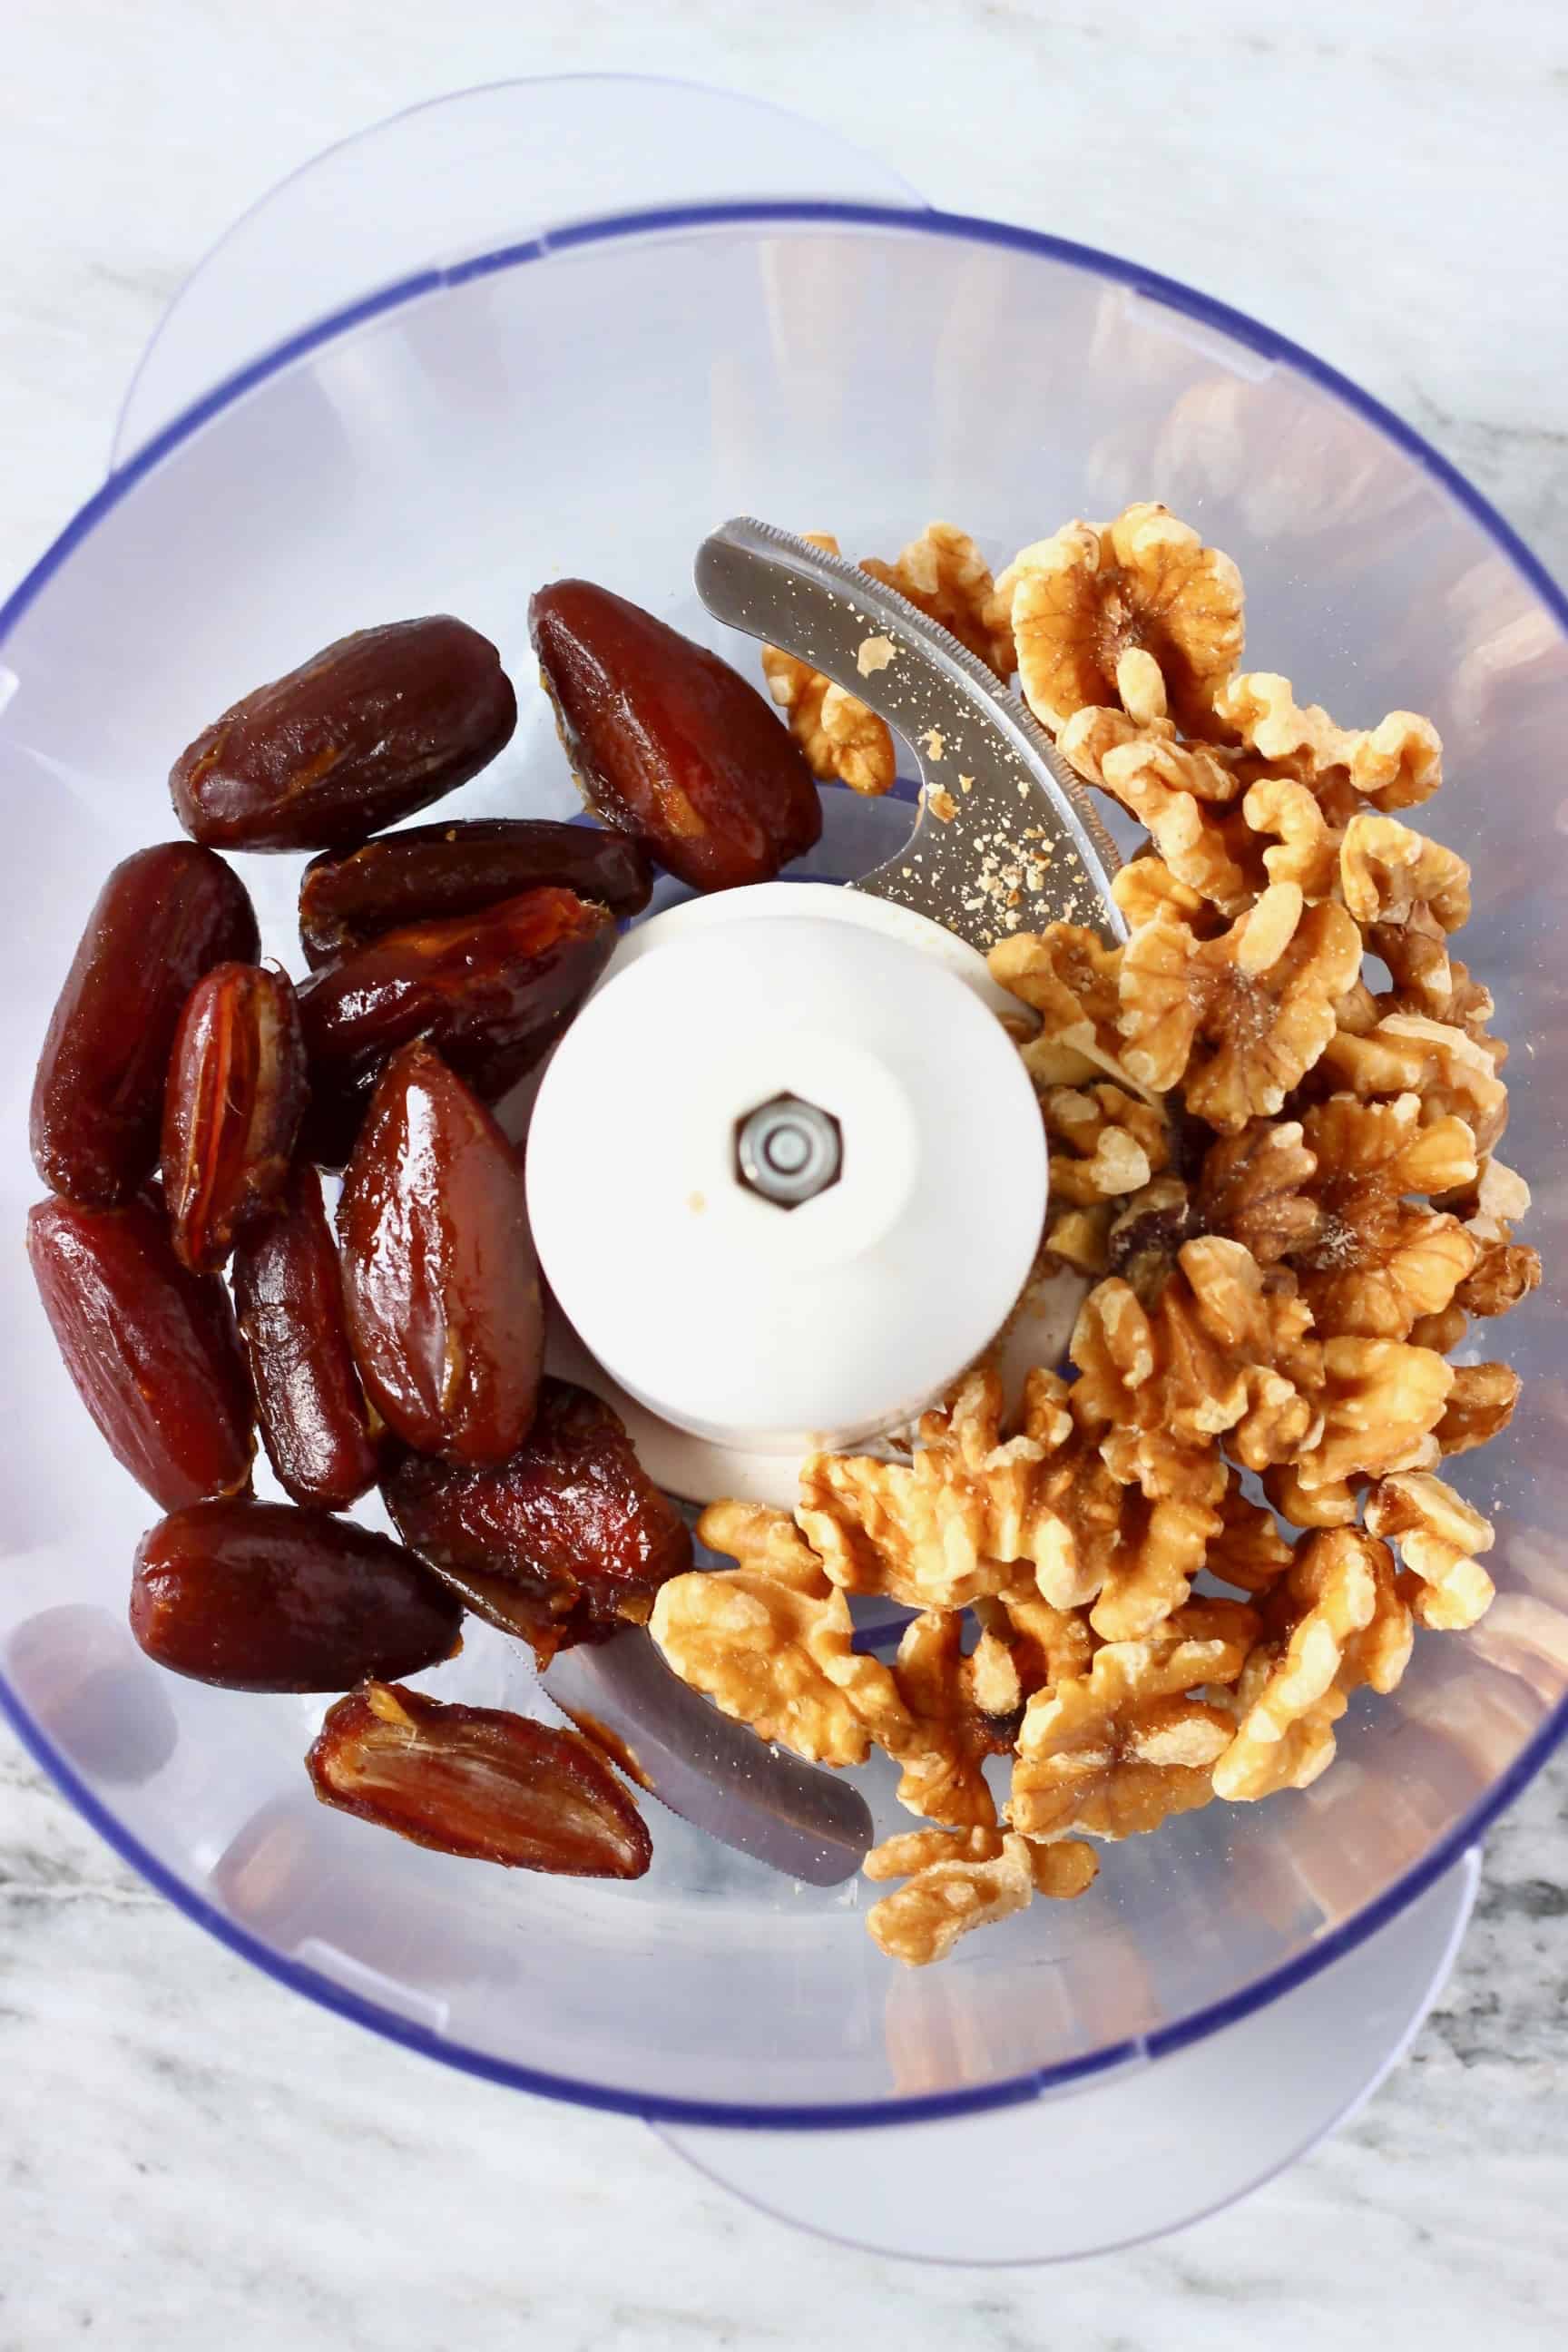 Dates, walnuts and salt in a food processor against a marble background